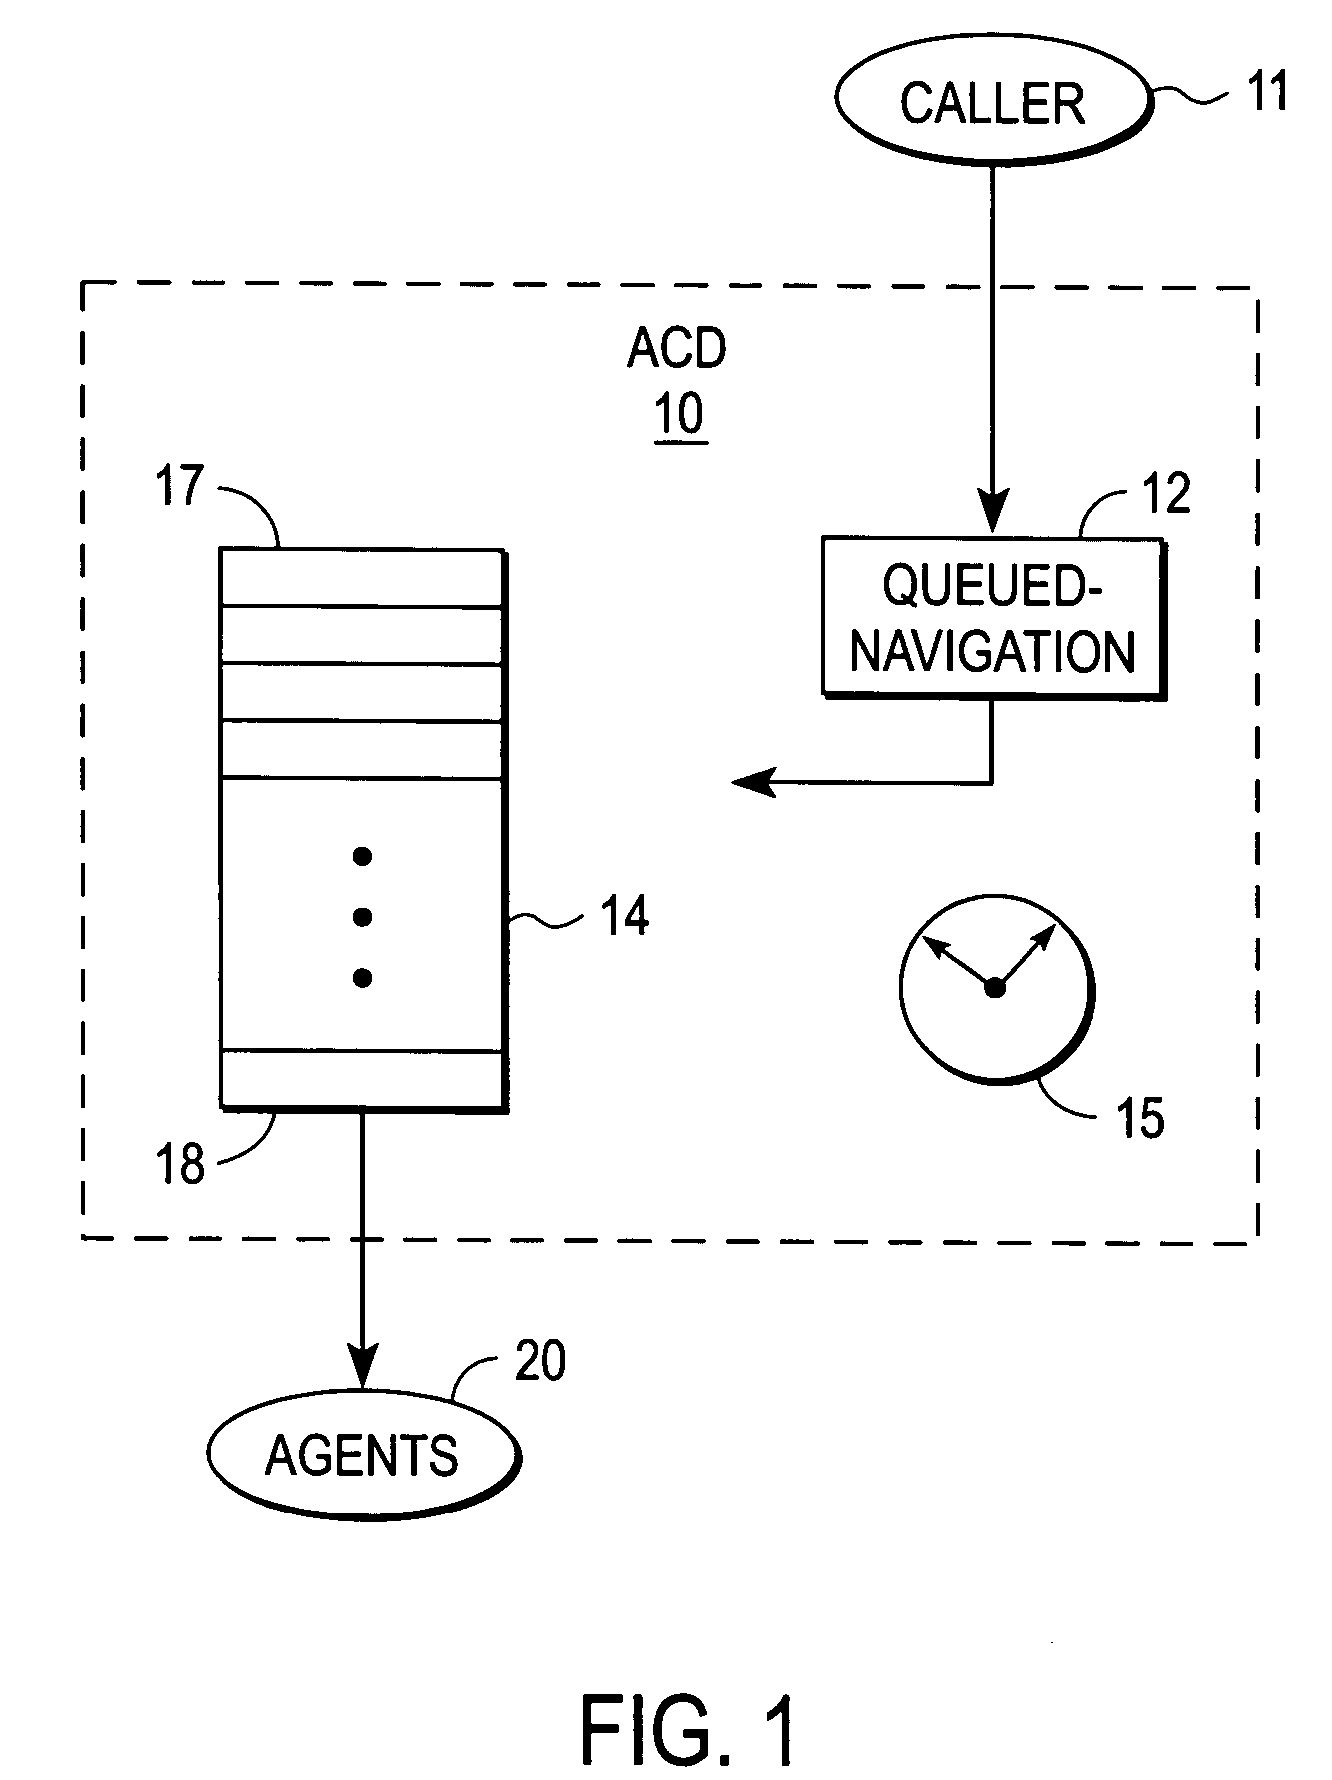 System and method for providing queue time credit for self-servicing callers